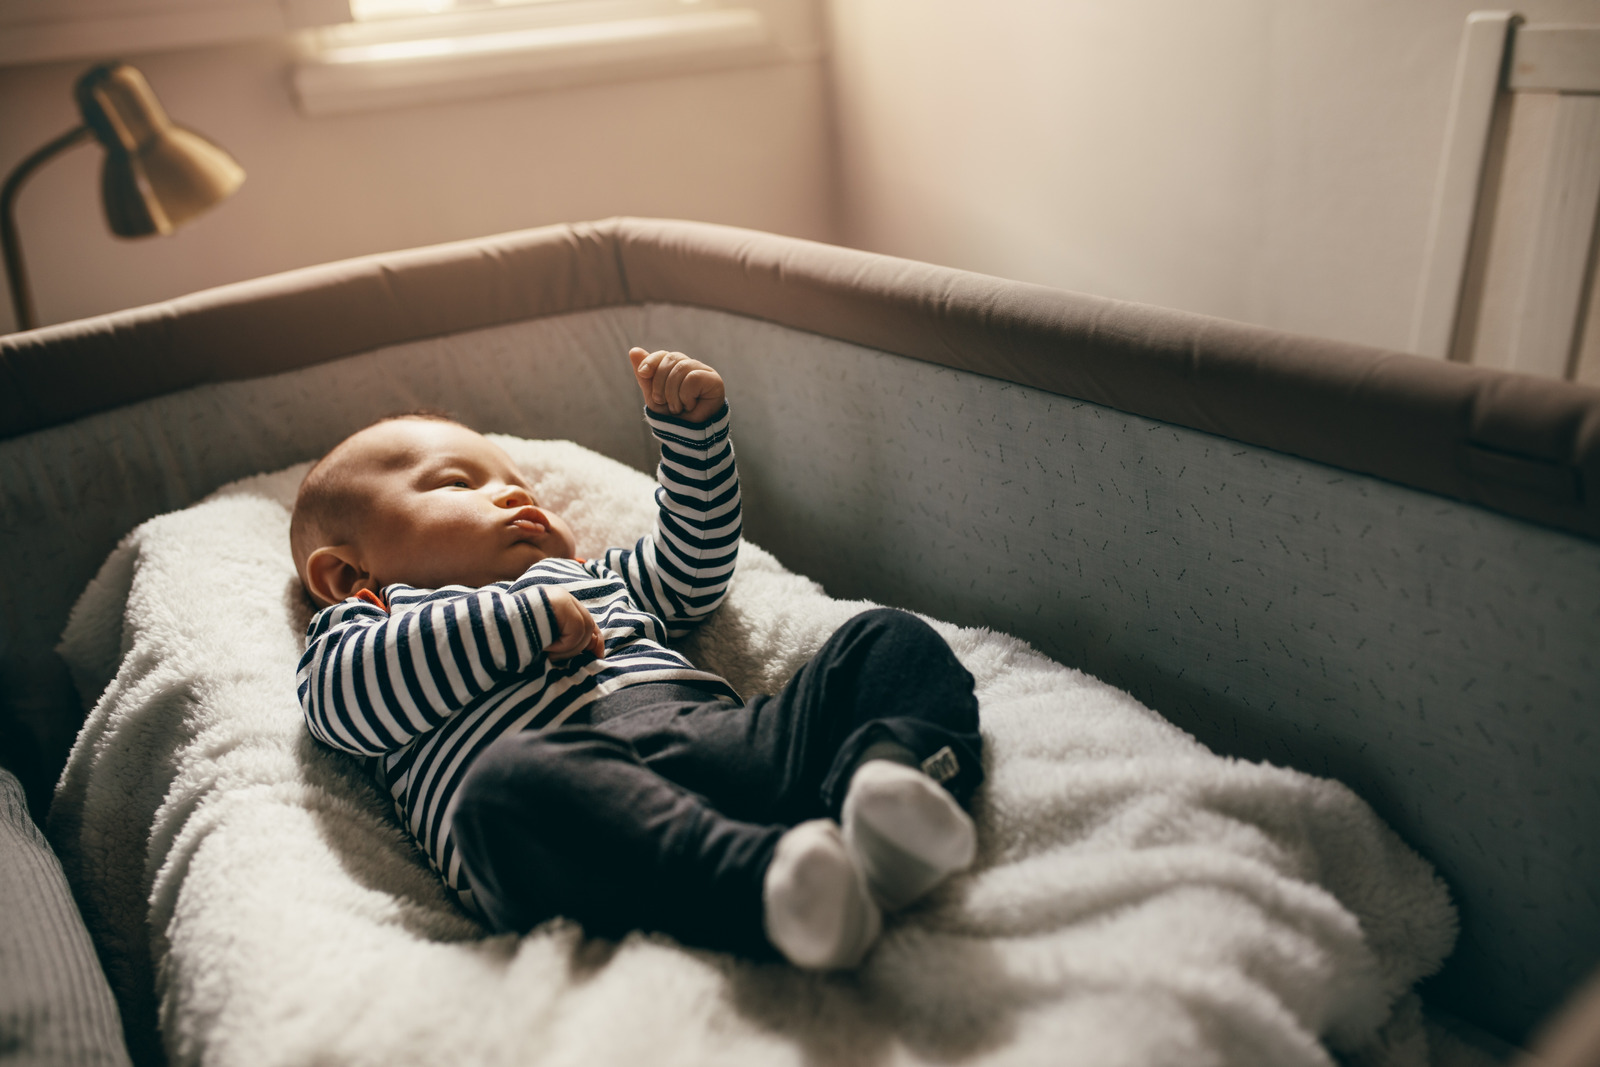 when should i move my baby from bassinet to crib